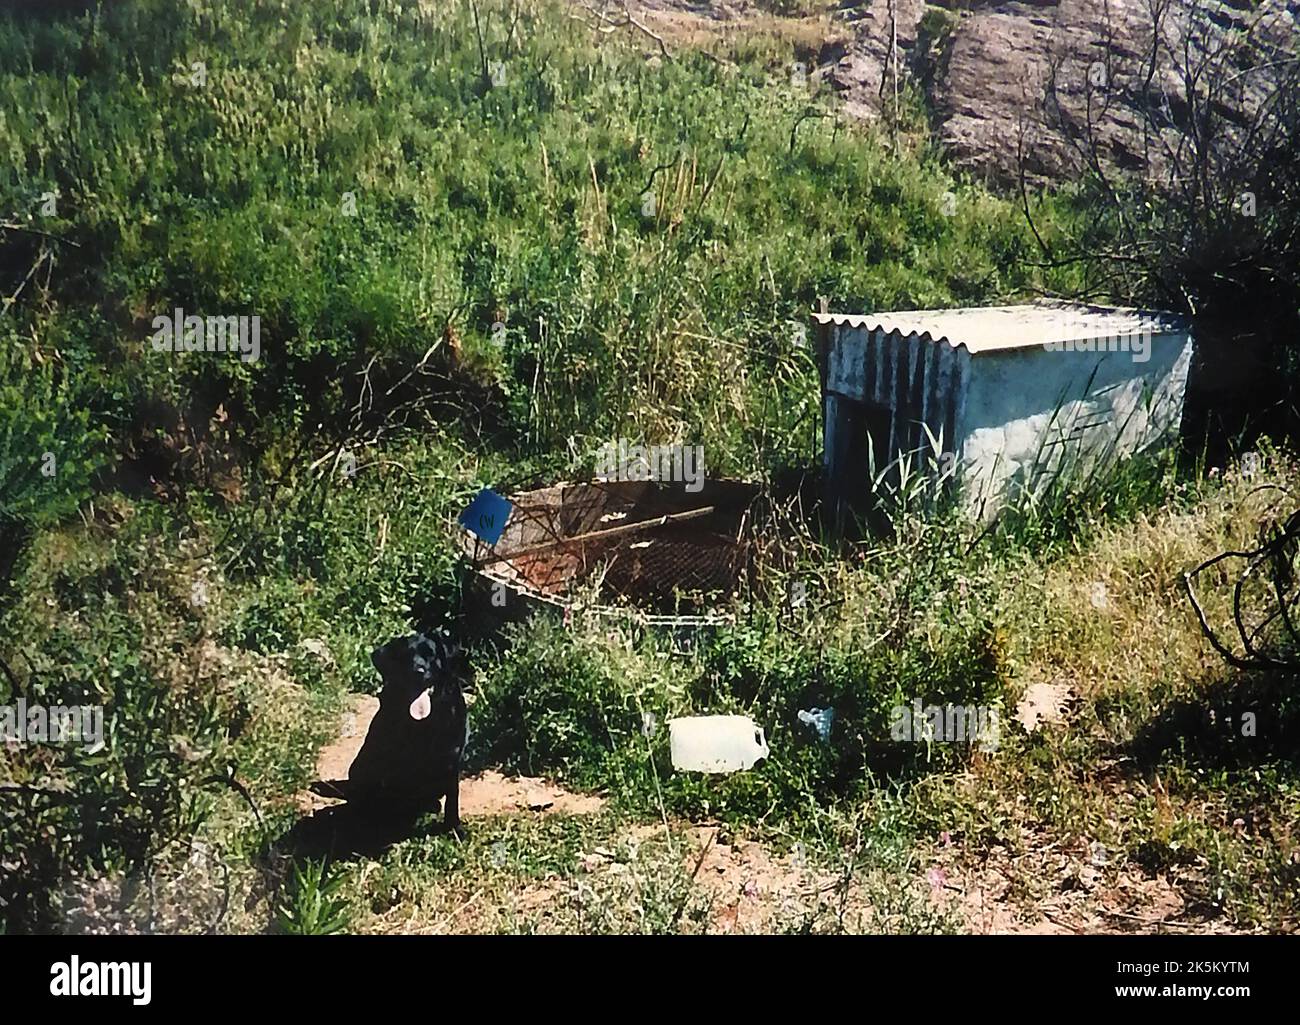 WELL - WATER SHORTAGES - a 1993 photograph of a typical home water supply in the Spanish hills near La Cala de Mijas, Costa del Sol, Spain. Stock Photo